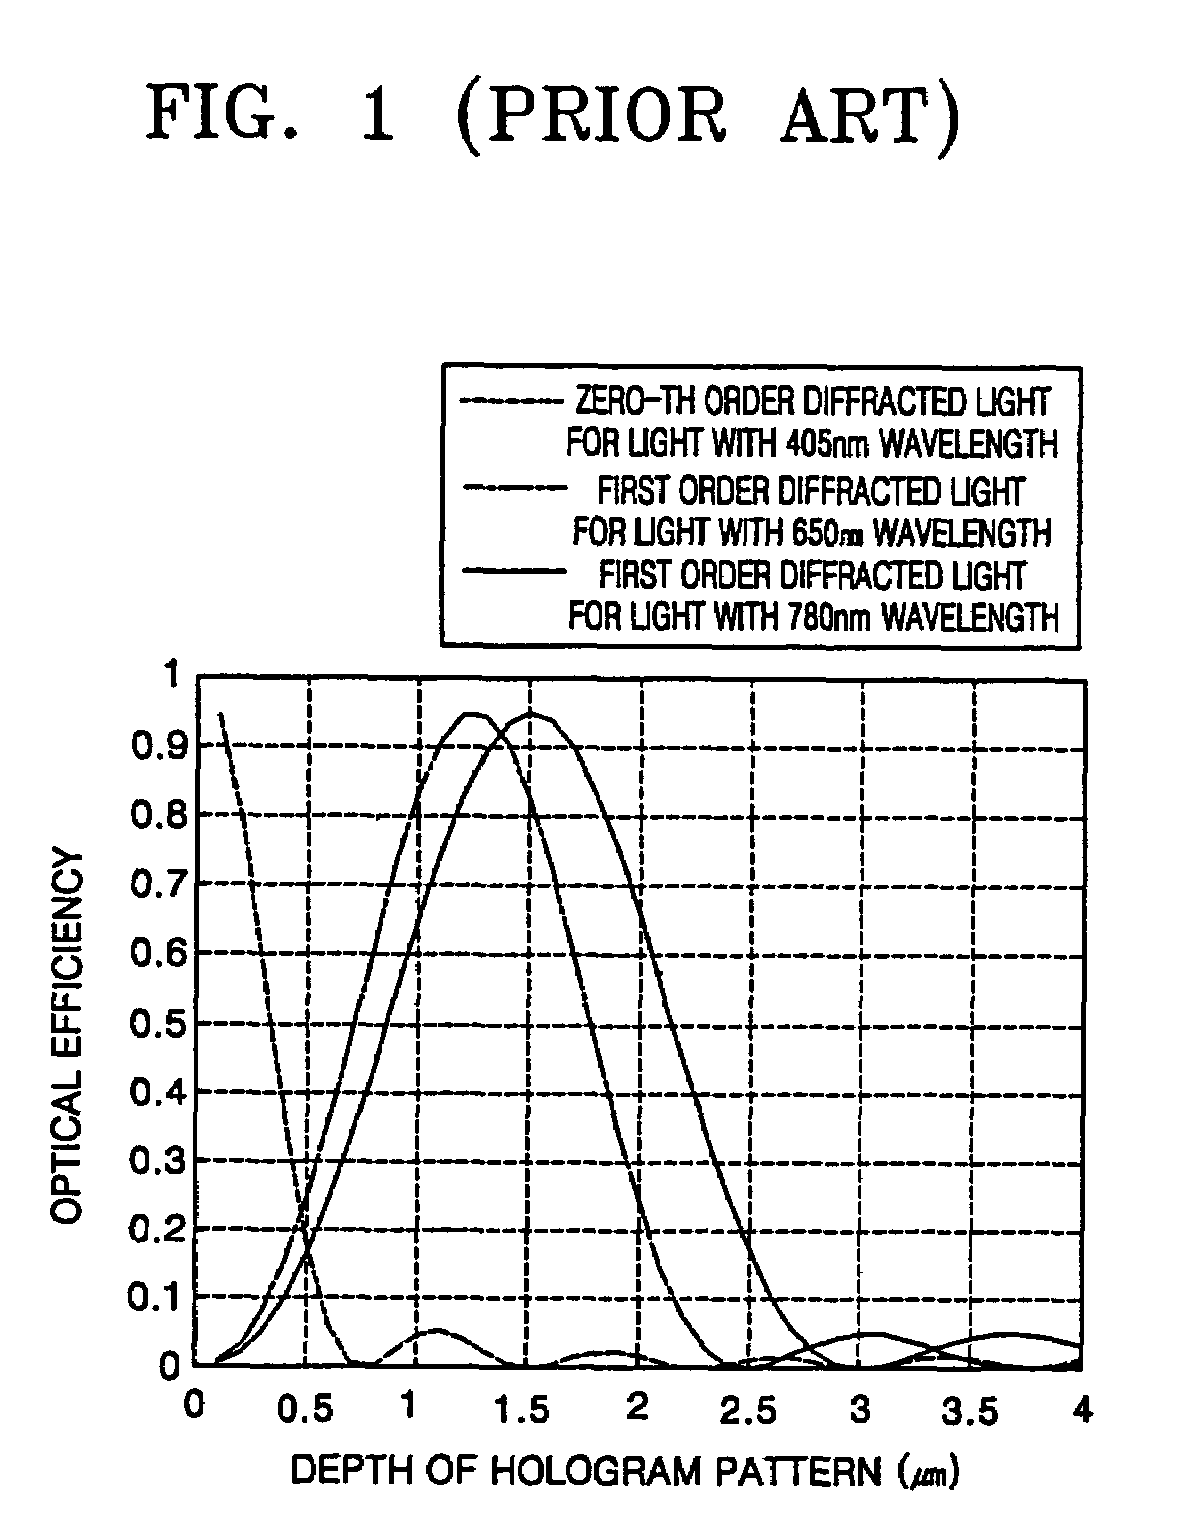 Lens correcting wavefront error caused by tilt and optical pickup using same